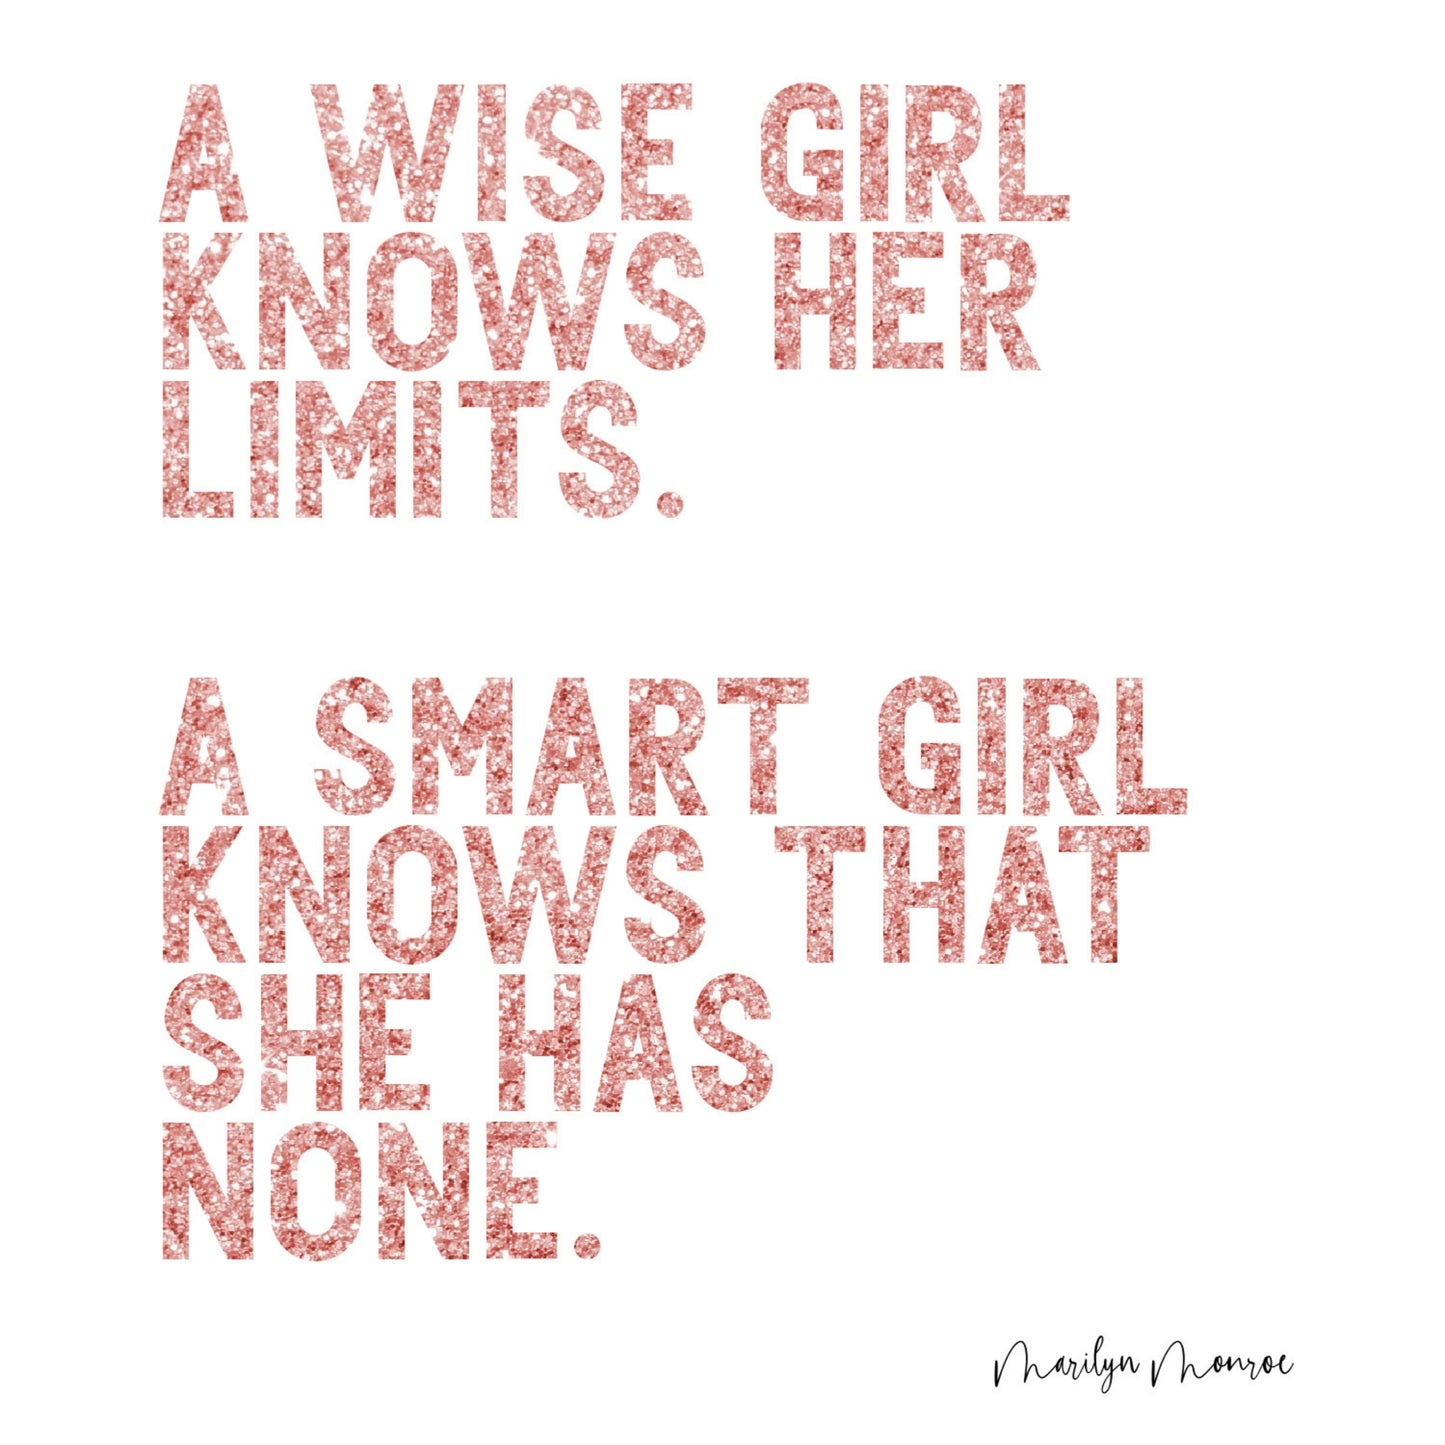 "A Wise Girl Knows Her Limits.  A Smart Girl Knows That She Has None." Famous Quote by Marilyn Monroe In Pink Glitter, Printable Art